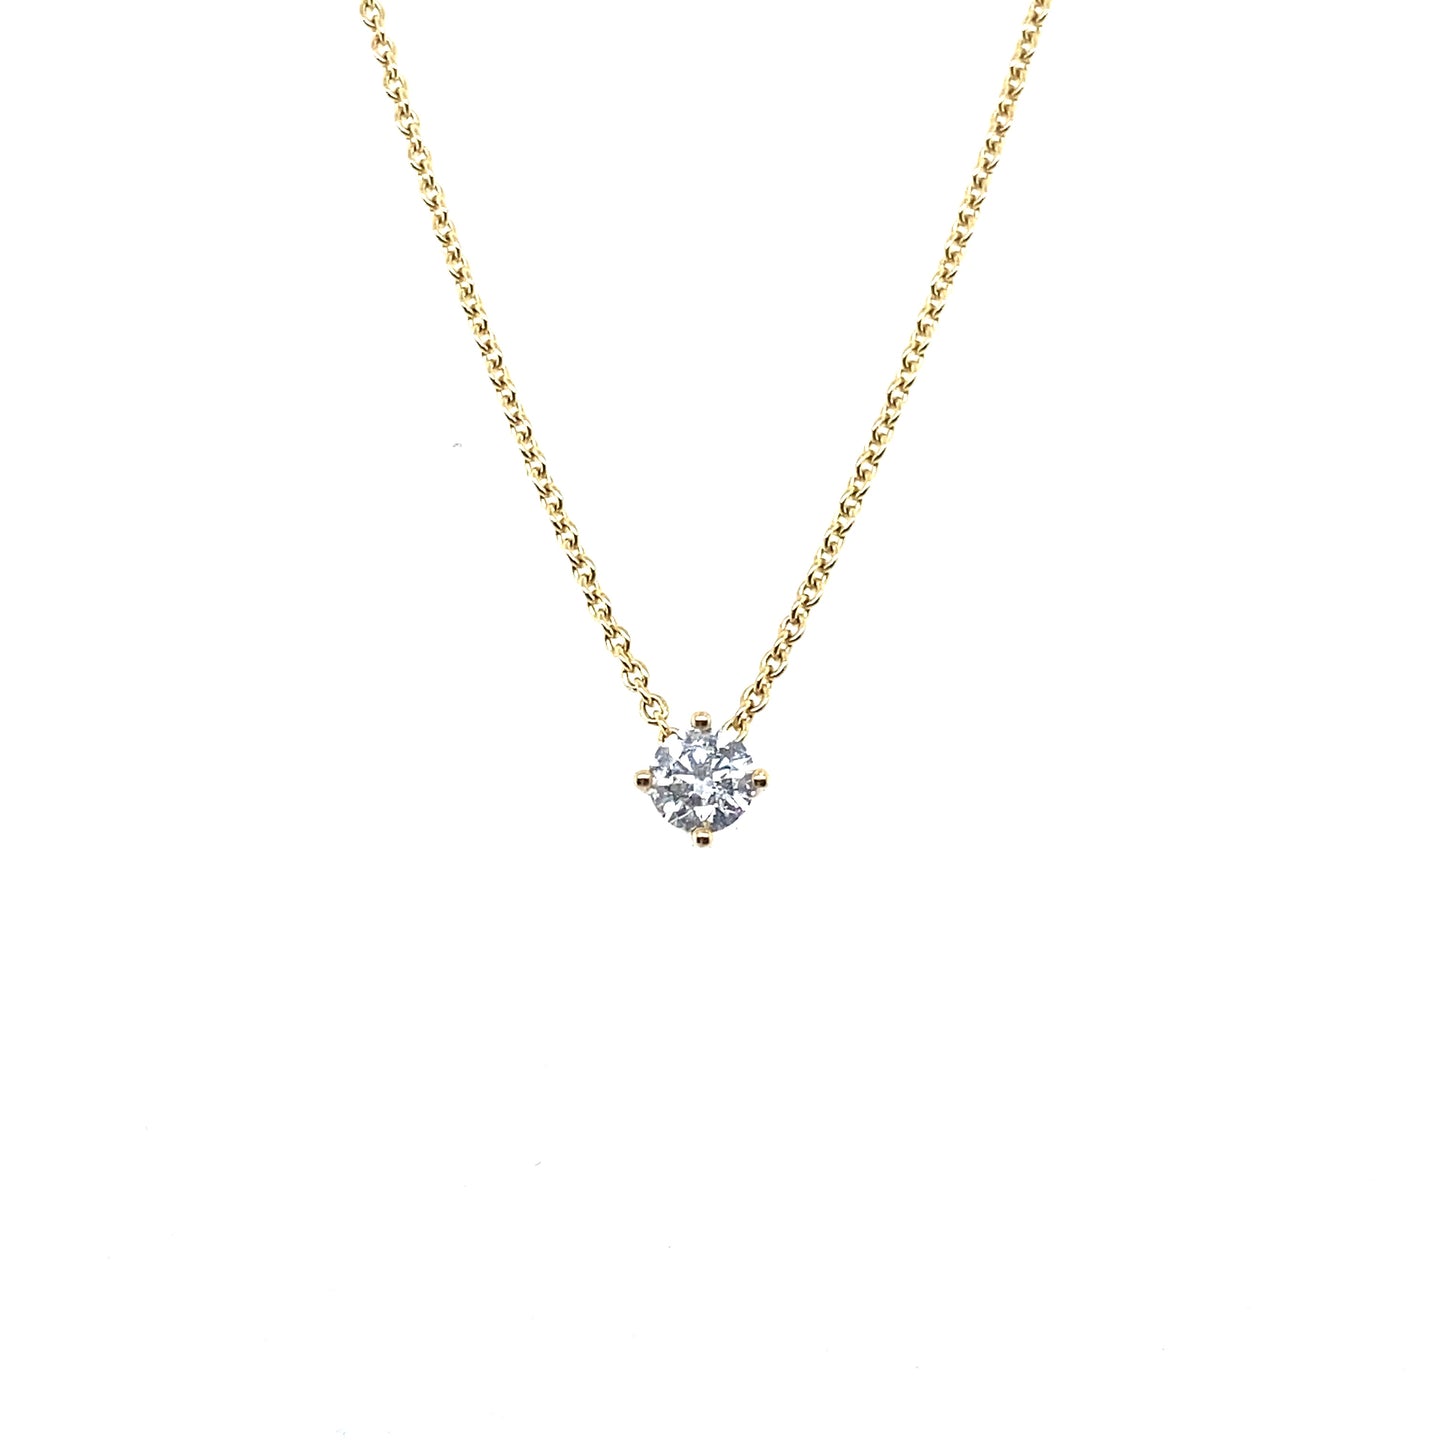 18ct Yellow Gold Solitaire Diamond Necklace